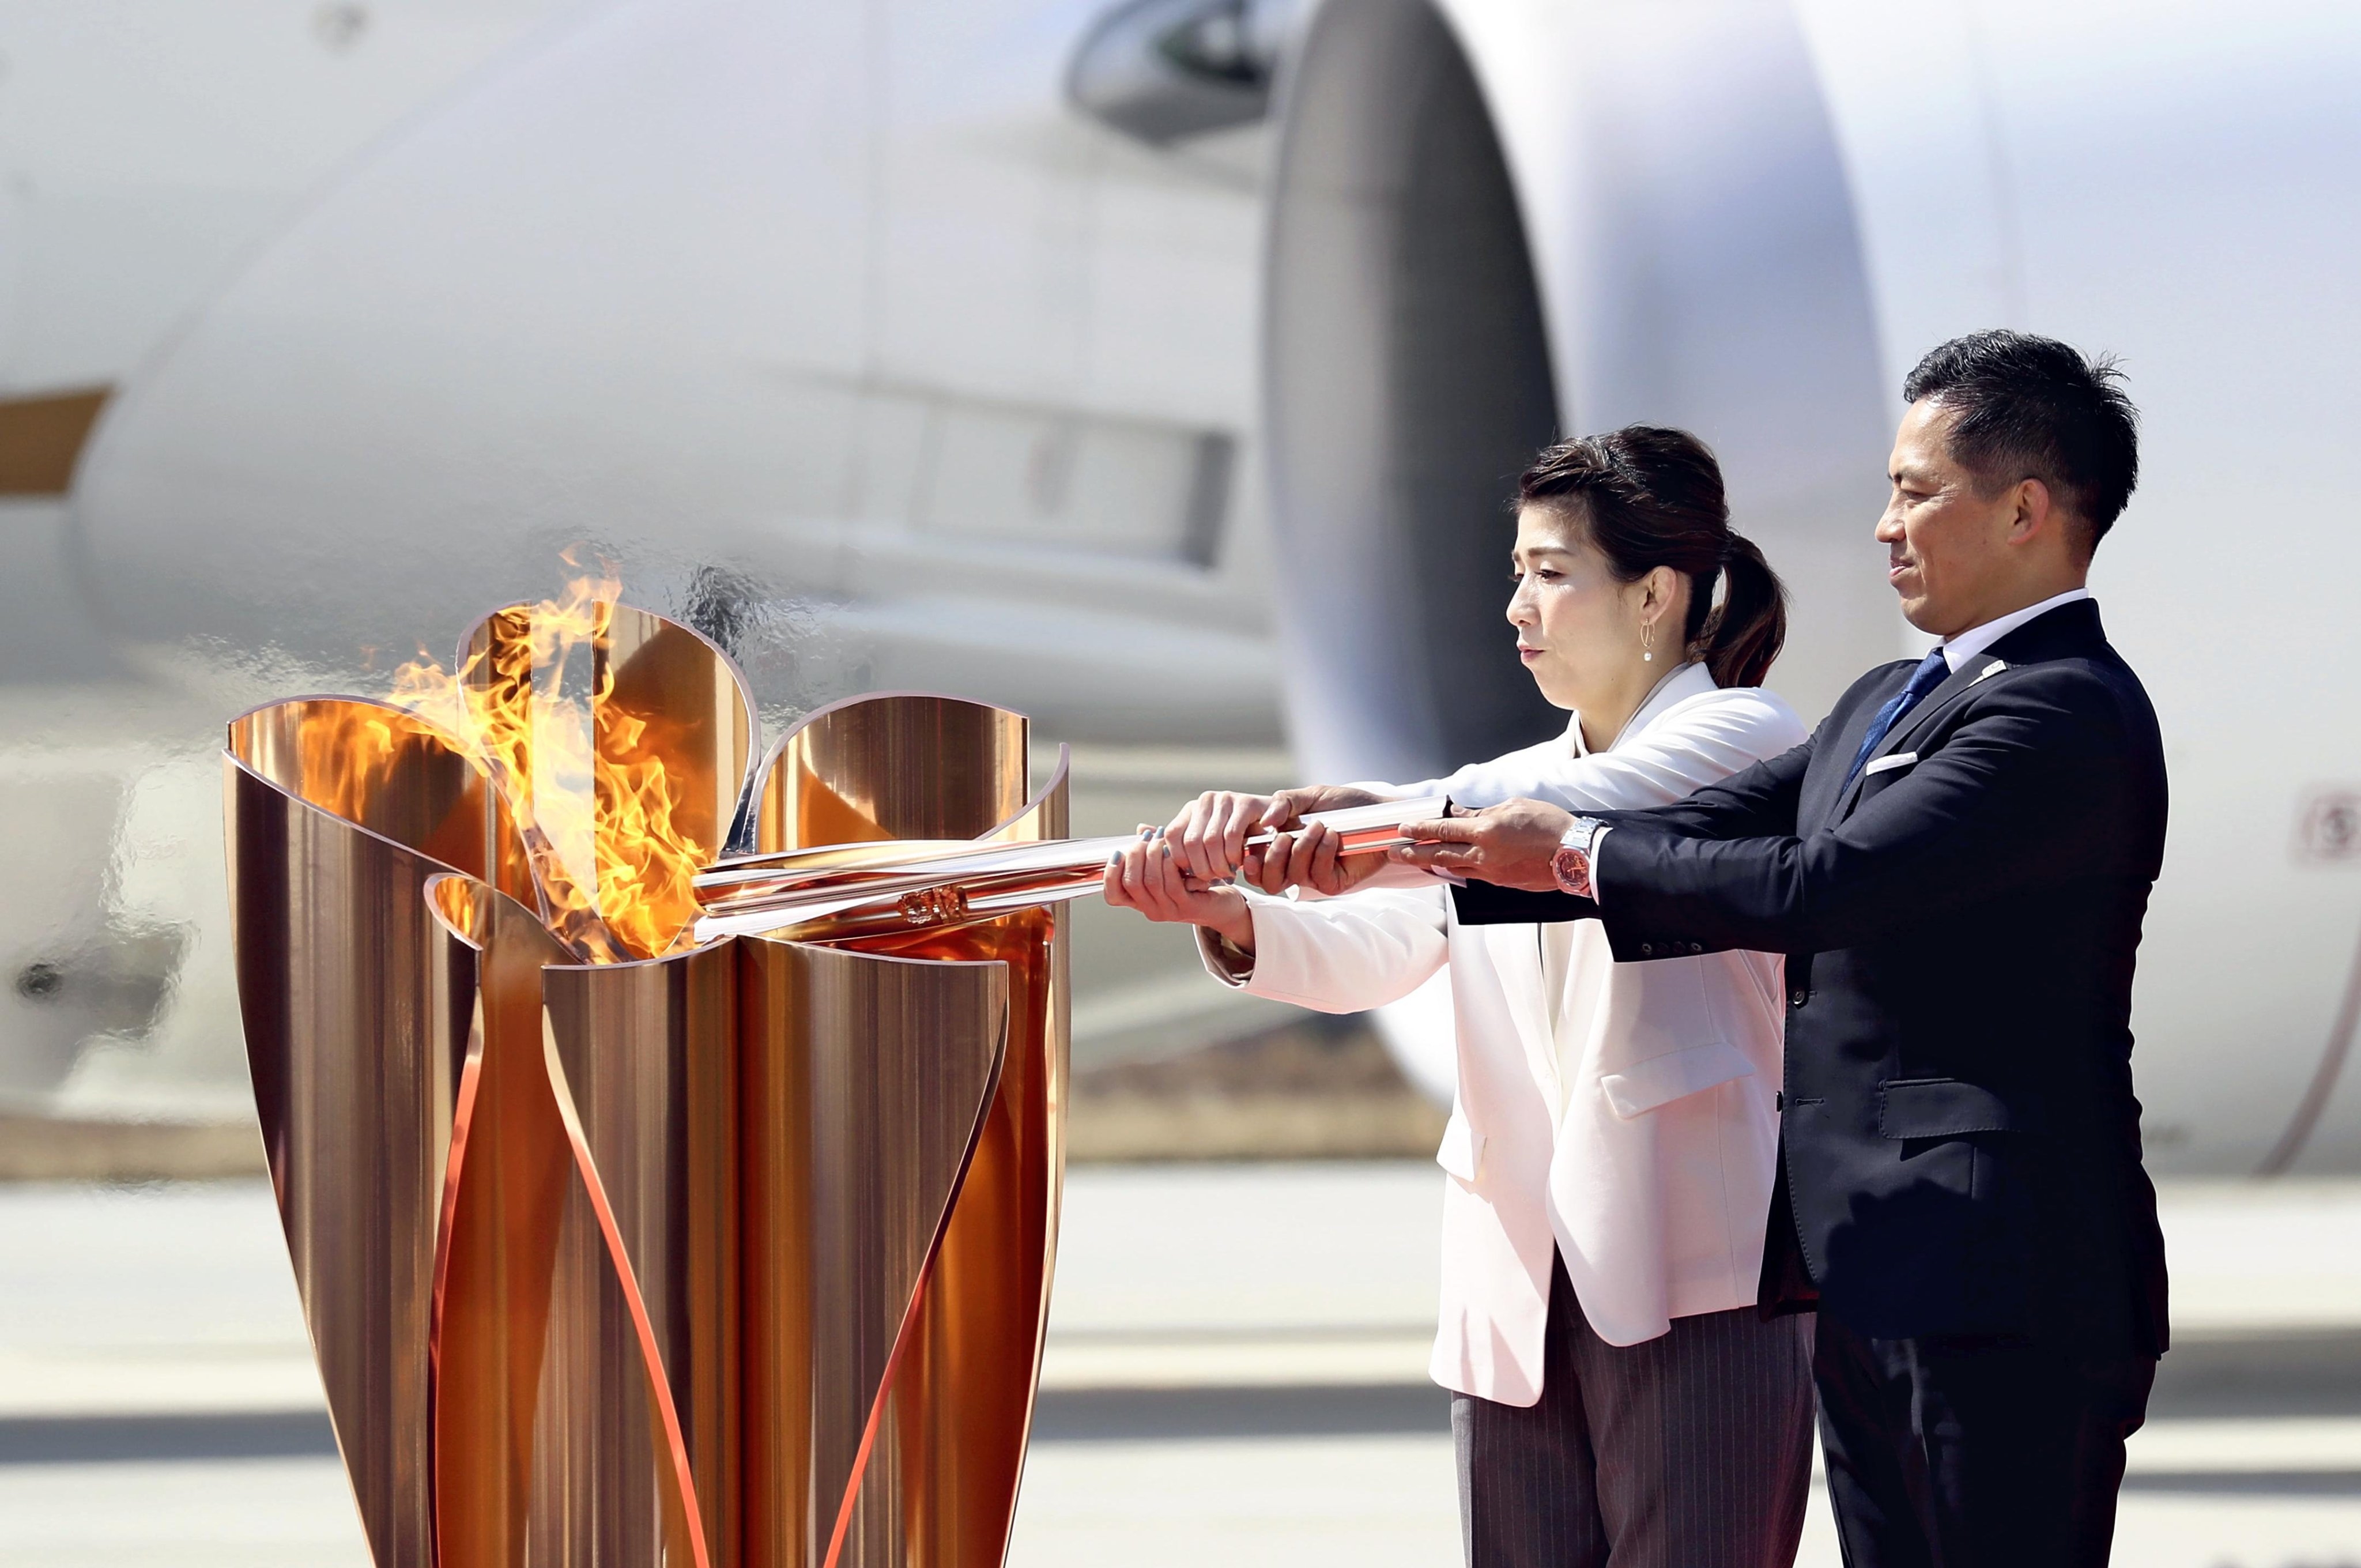 Thousands of people flocked to take Selfies with the Olympic flame in northeastern Japan